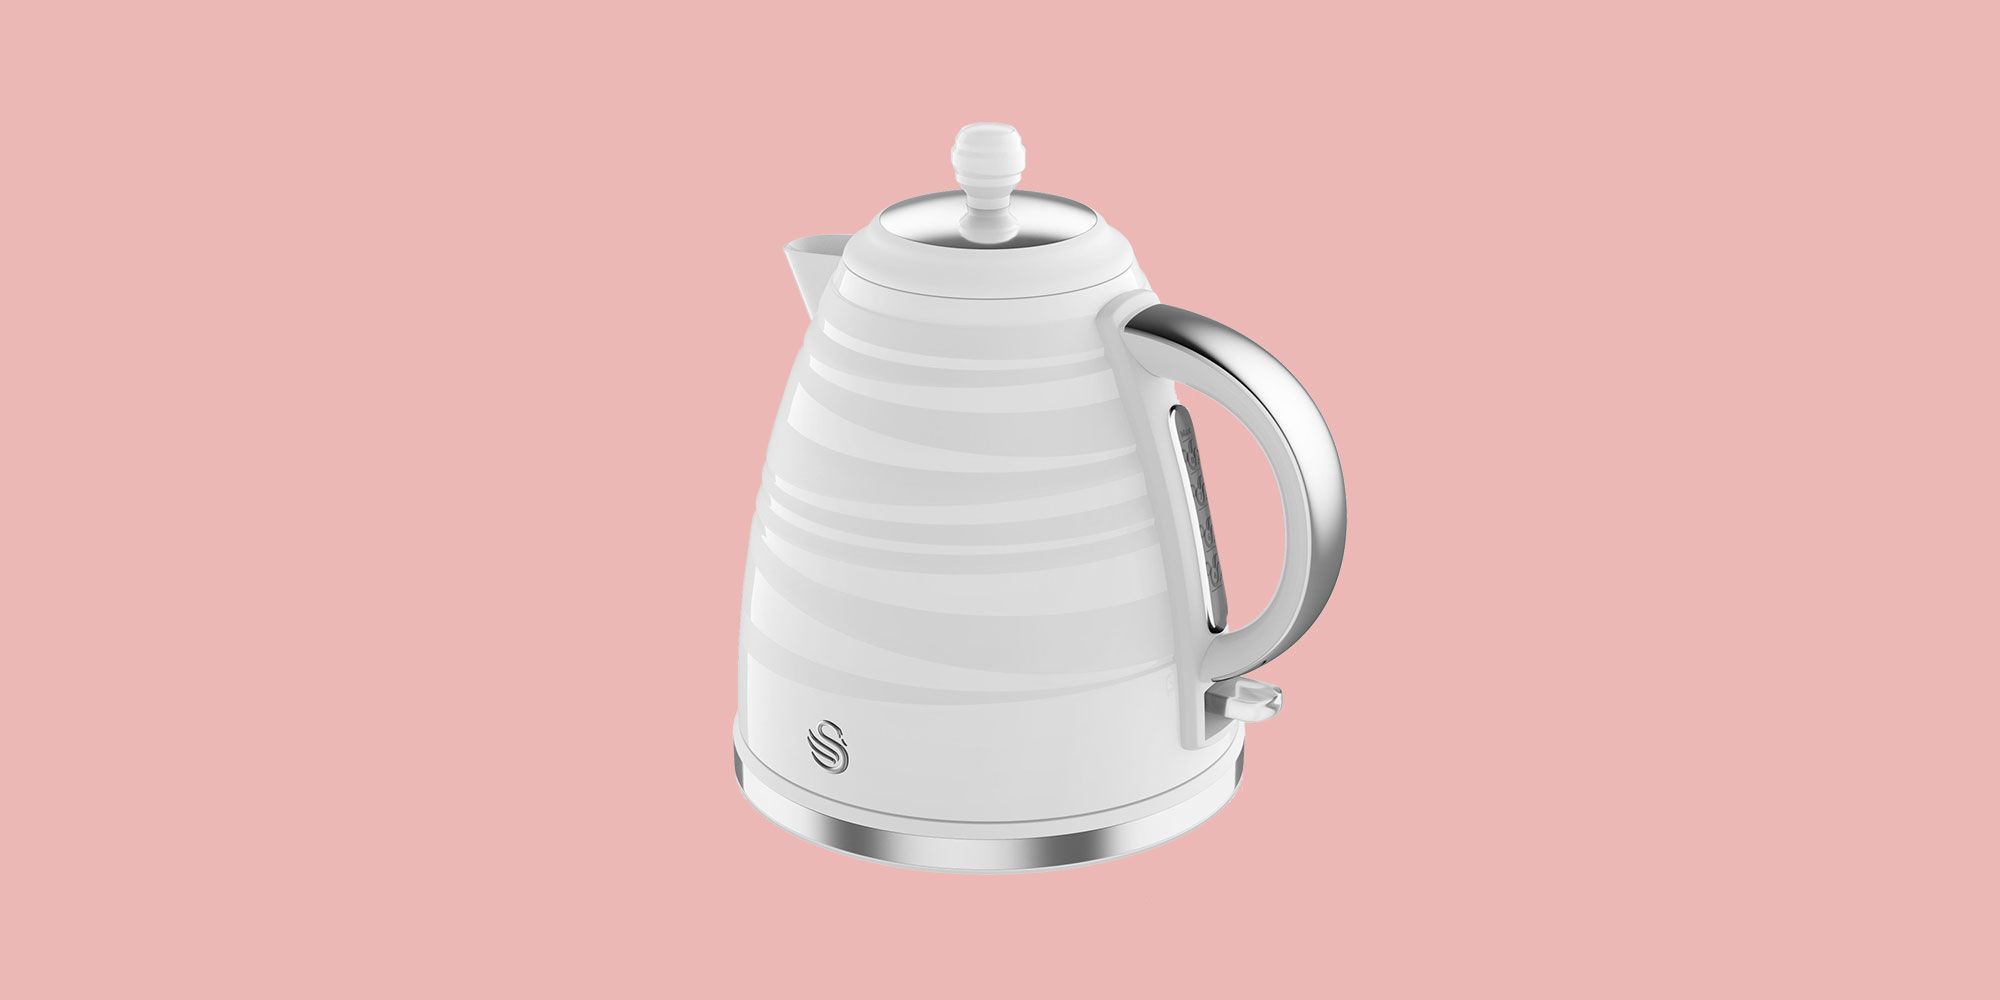 Dualit Pour Over Kettle Review: A specialist kettle for the coffee lover